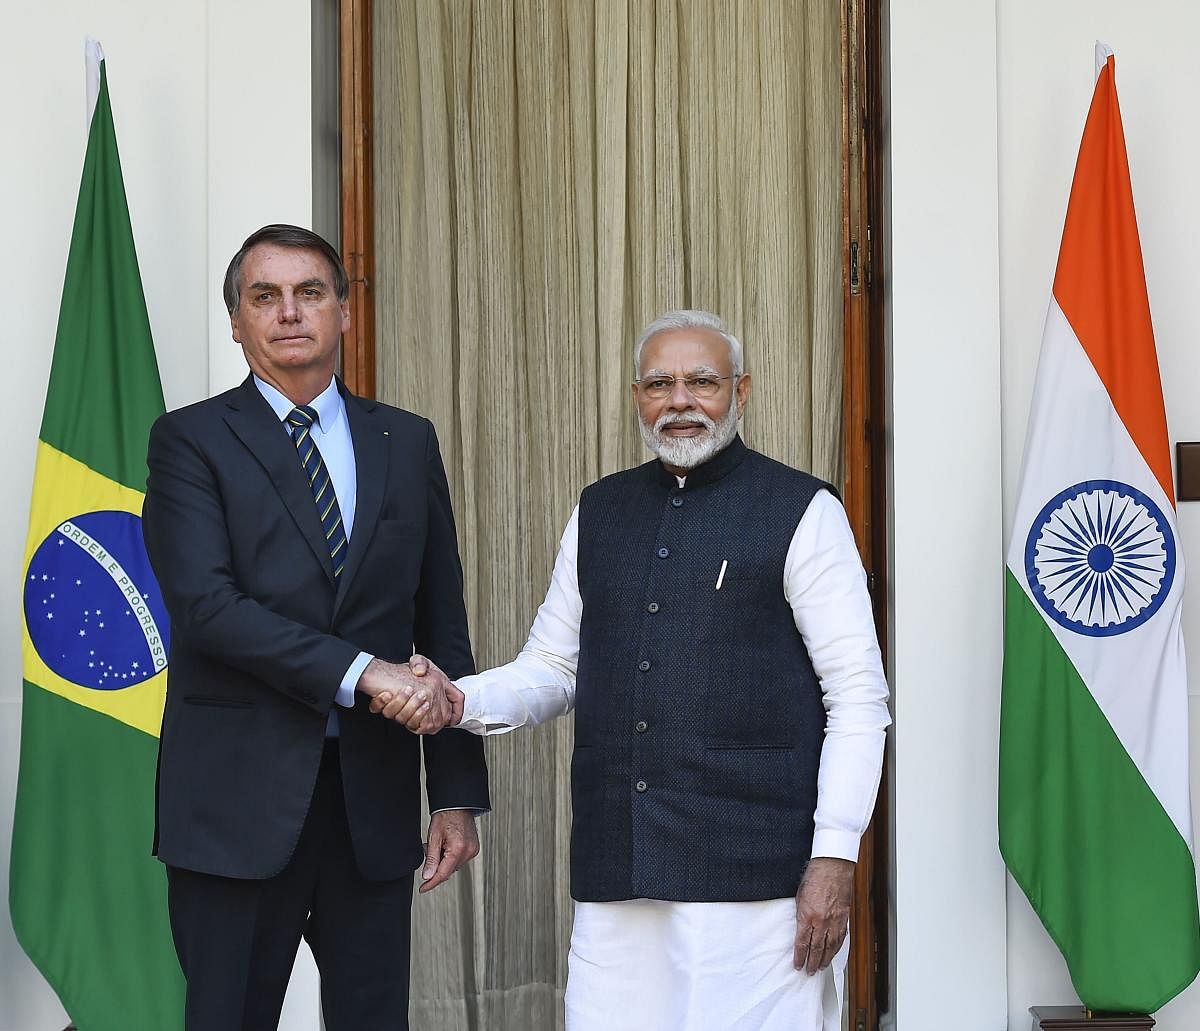 Prime Minister Narendra Modi shakes hands with Brazil's President Jair Messias Bolsonaro prior to a meeting at the Hyderabad House, in New Delhi, Saturday, Jan. 25, 2020. (PTI photo)